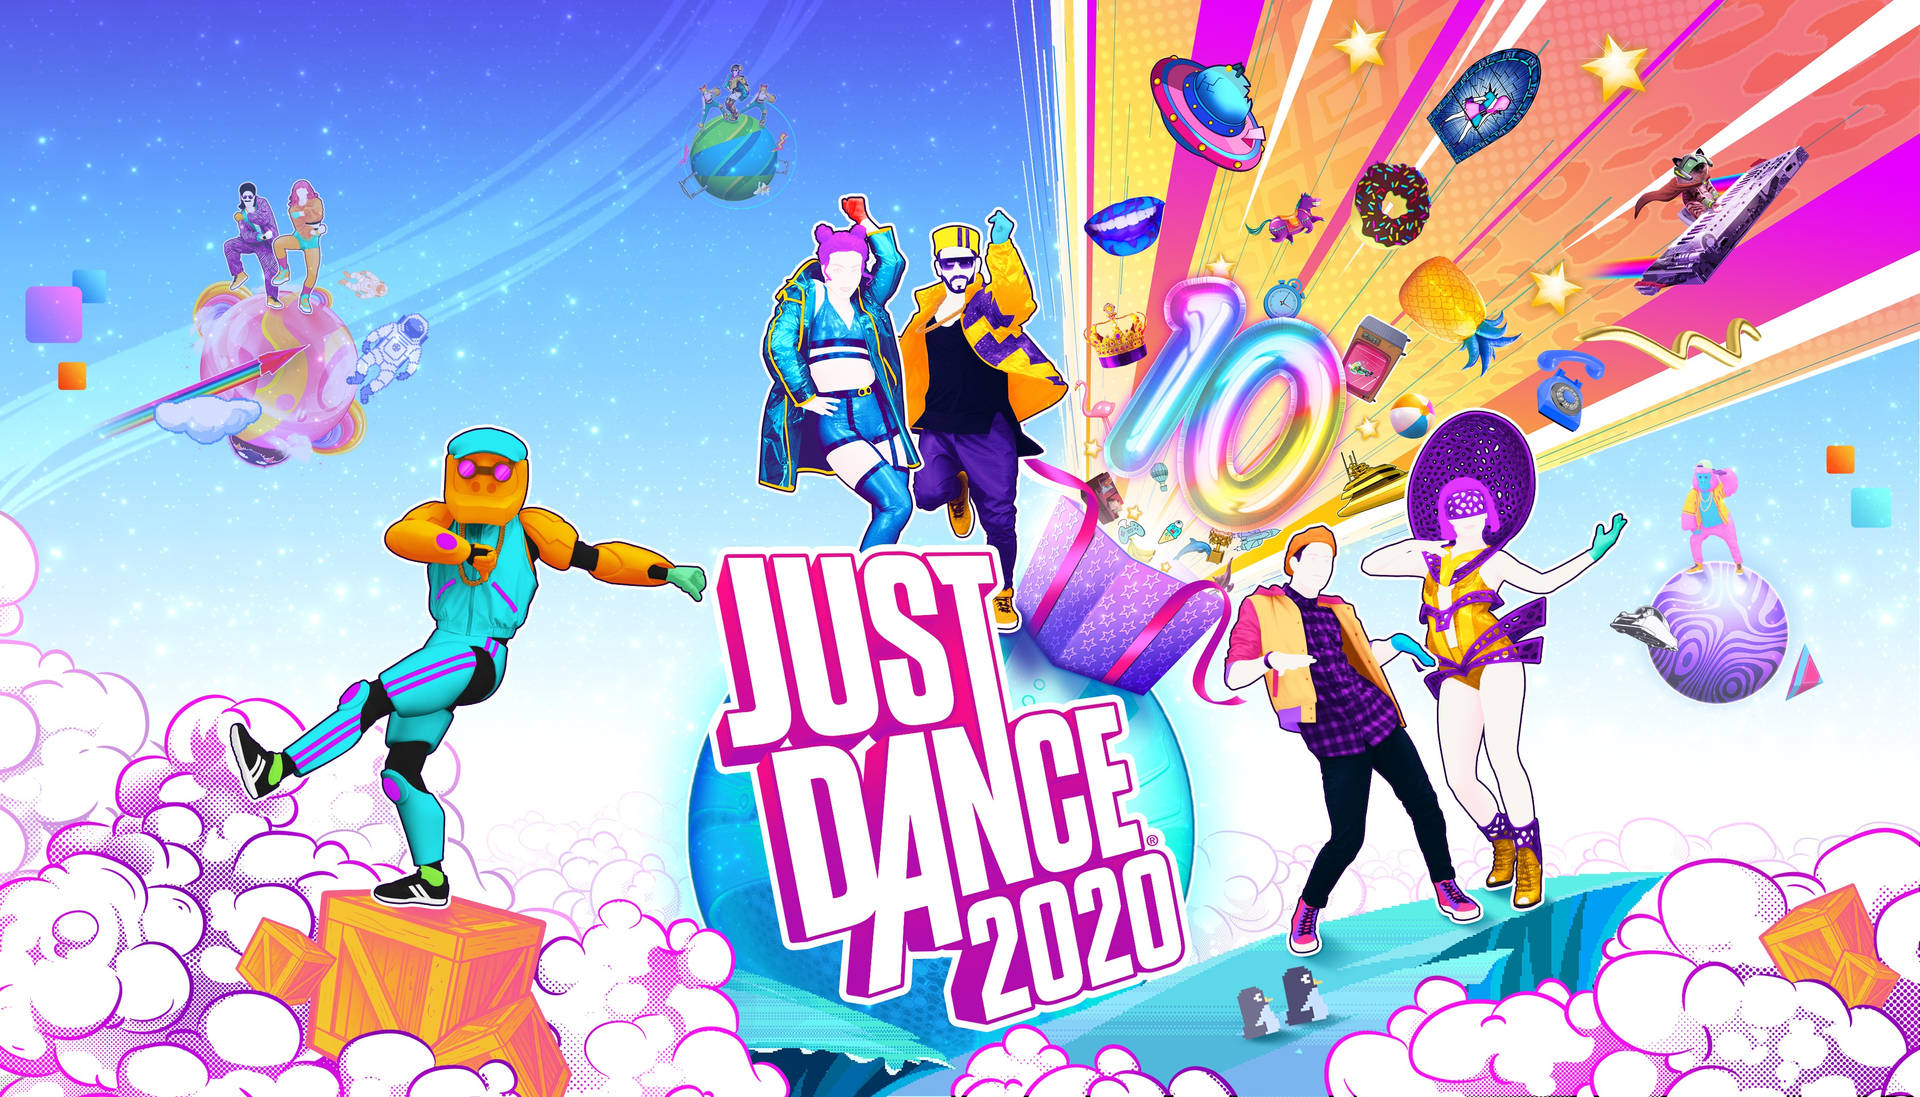 Just Dance 2020 Poster Background